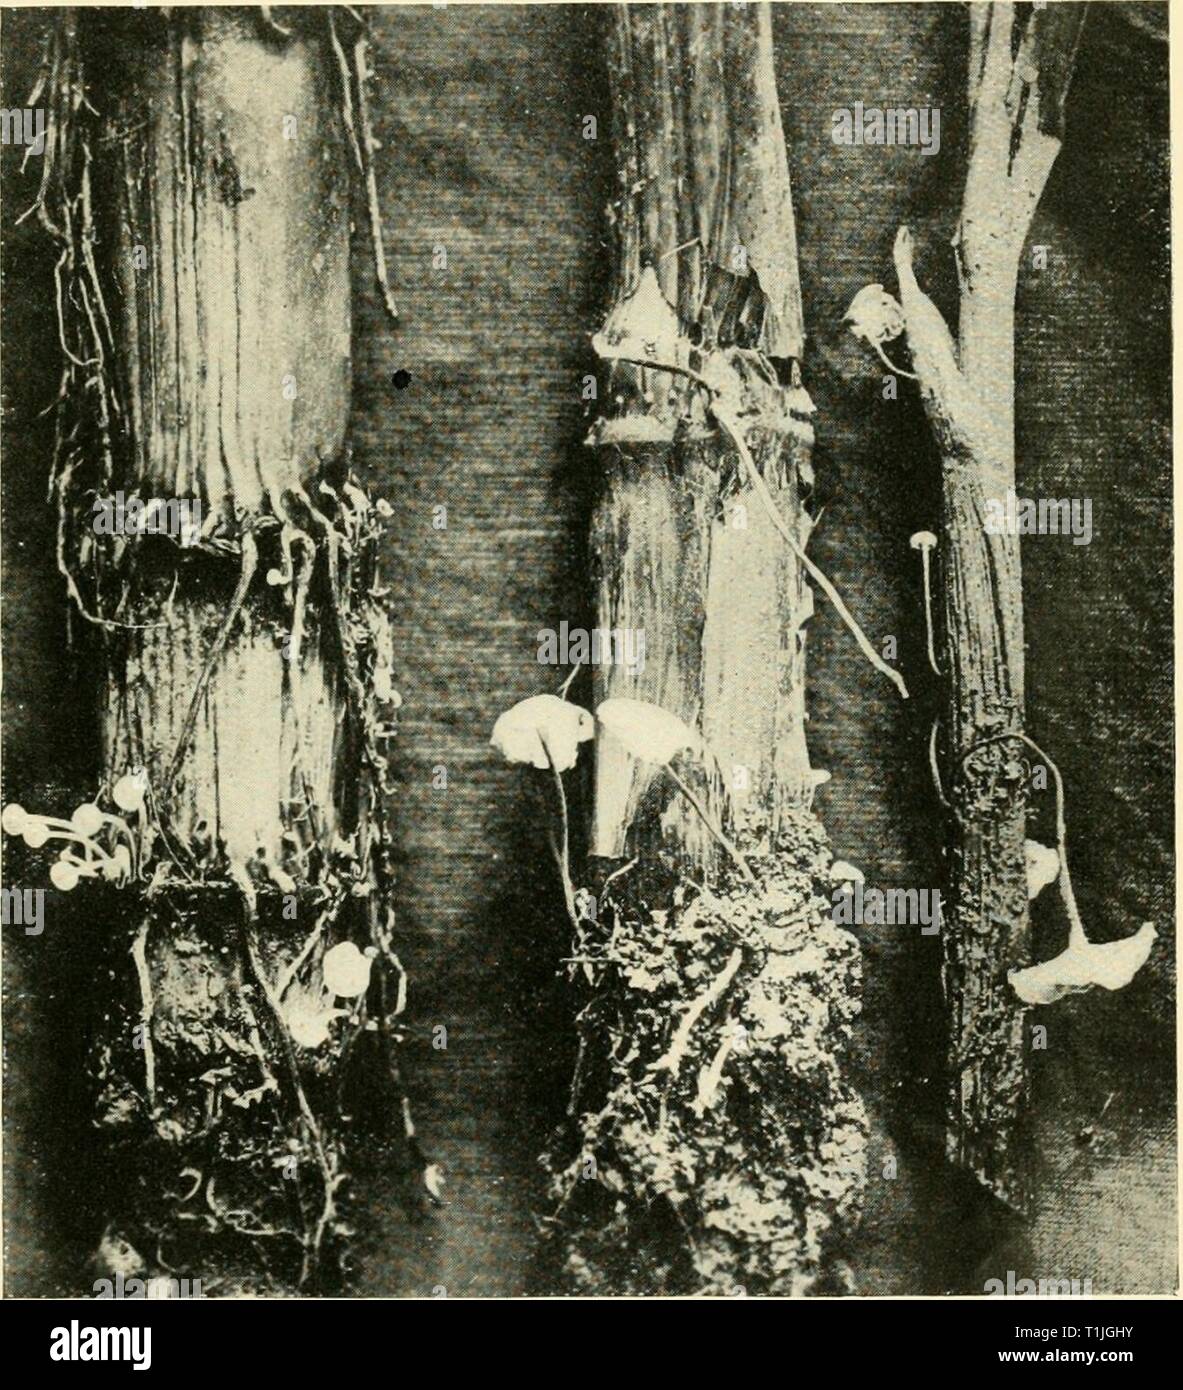 Diseases of crop-plants in the Diseases of crop-plants in the Lesser Antilles  diseasesofcroppl00nowe Year: 1923  Fis. Ill FRucxrFiCATioNS OF Marasmius associated with Acute Root Disease of Sugar-Cane, Trinidad Stock Photo